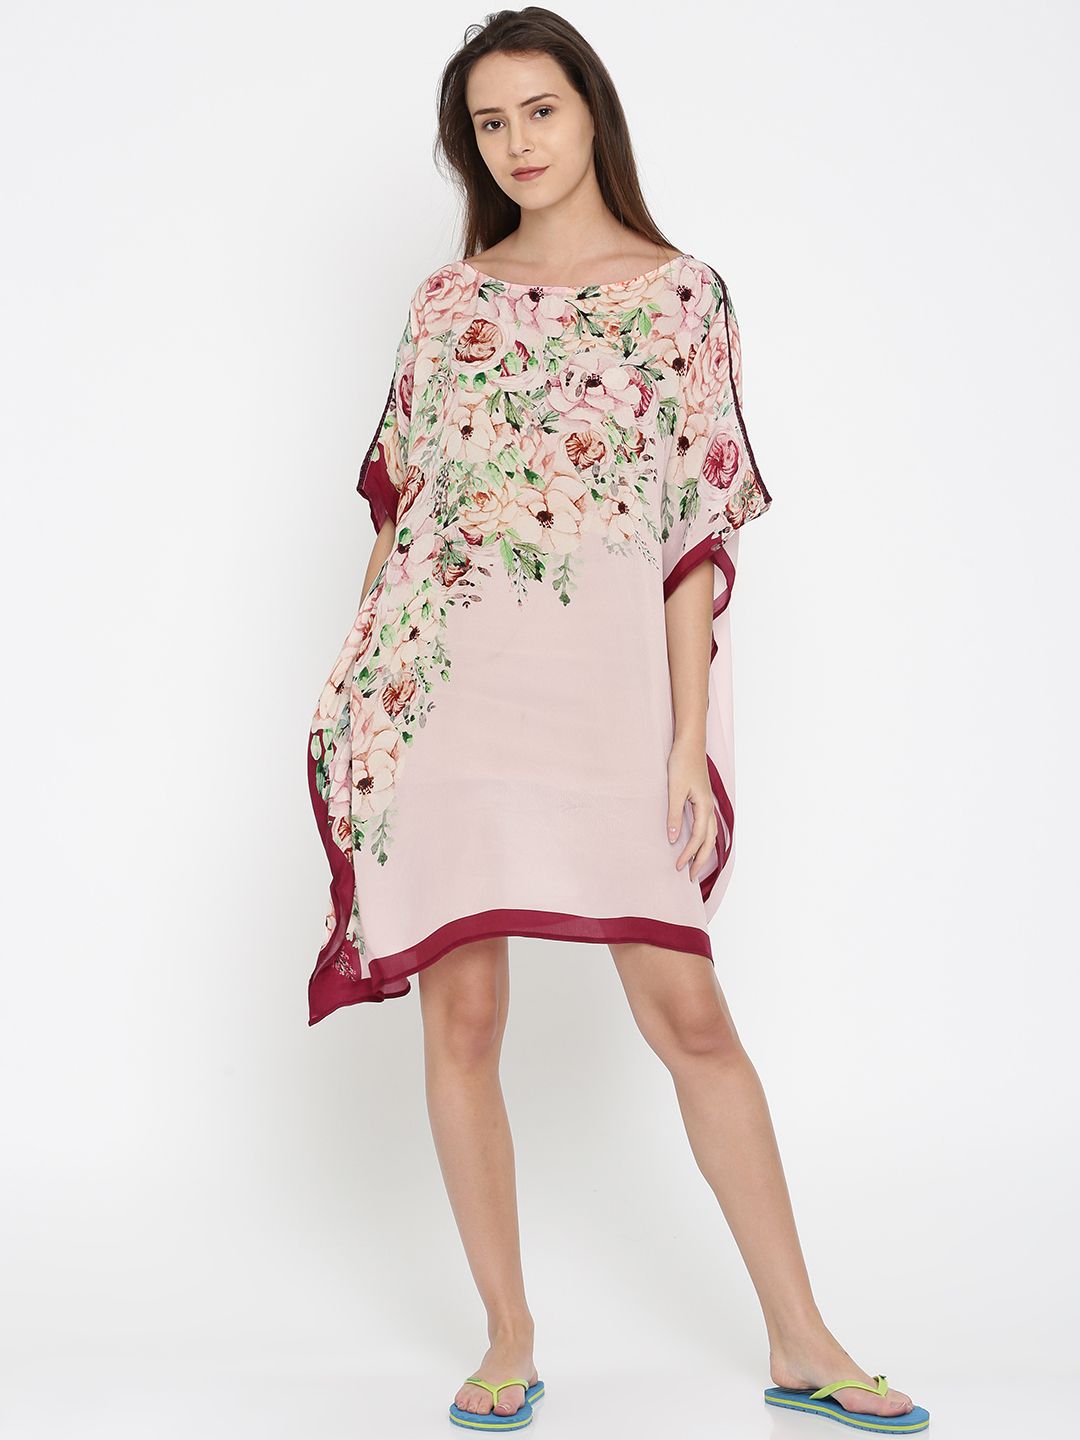 The Kaftan Company Pink Floral Print Kaftan Cover-Up Dress TP_VS_FLORADP01 Price in India